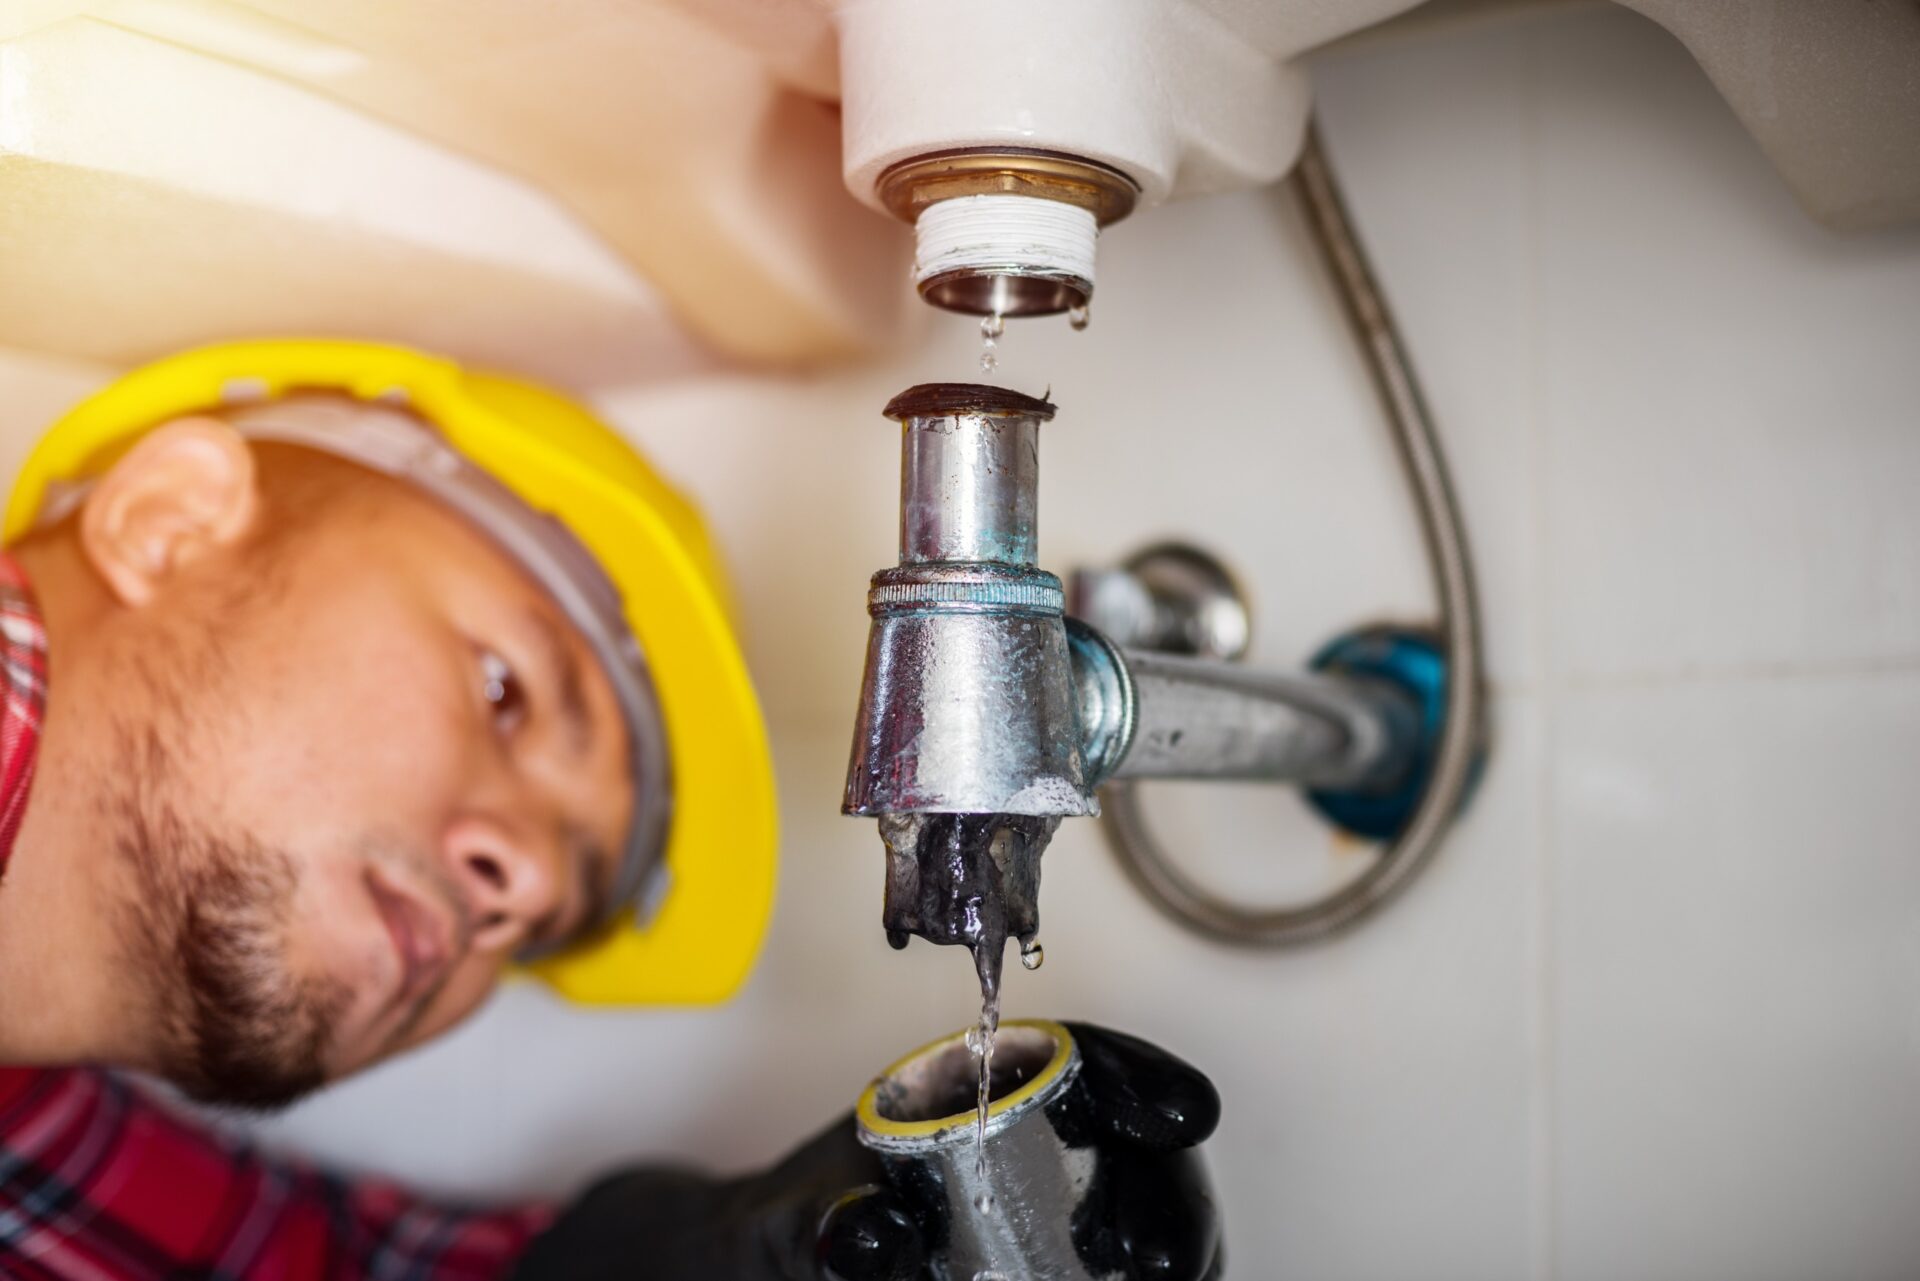 Repairing clogged and leaky washbasin sewer in the bathroom